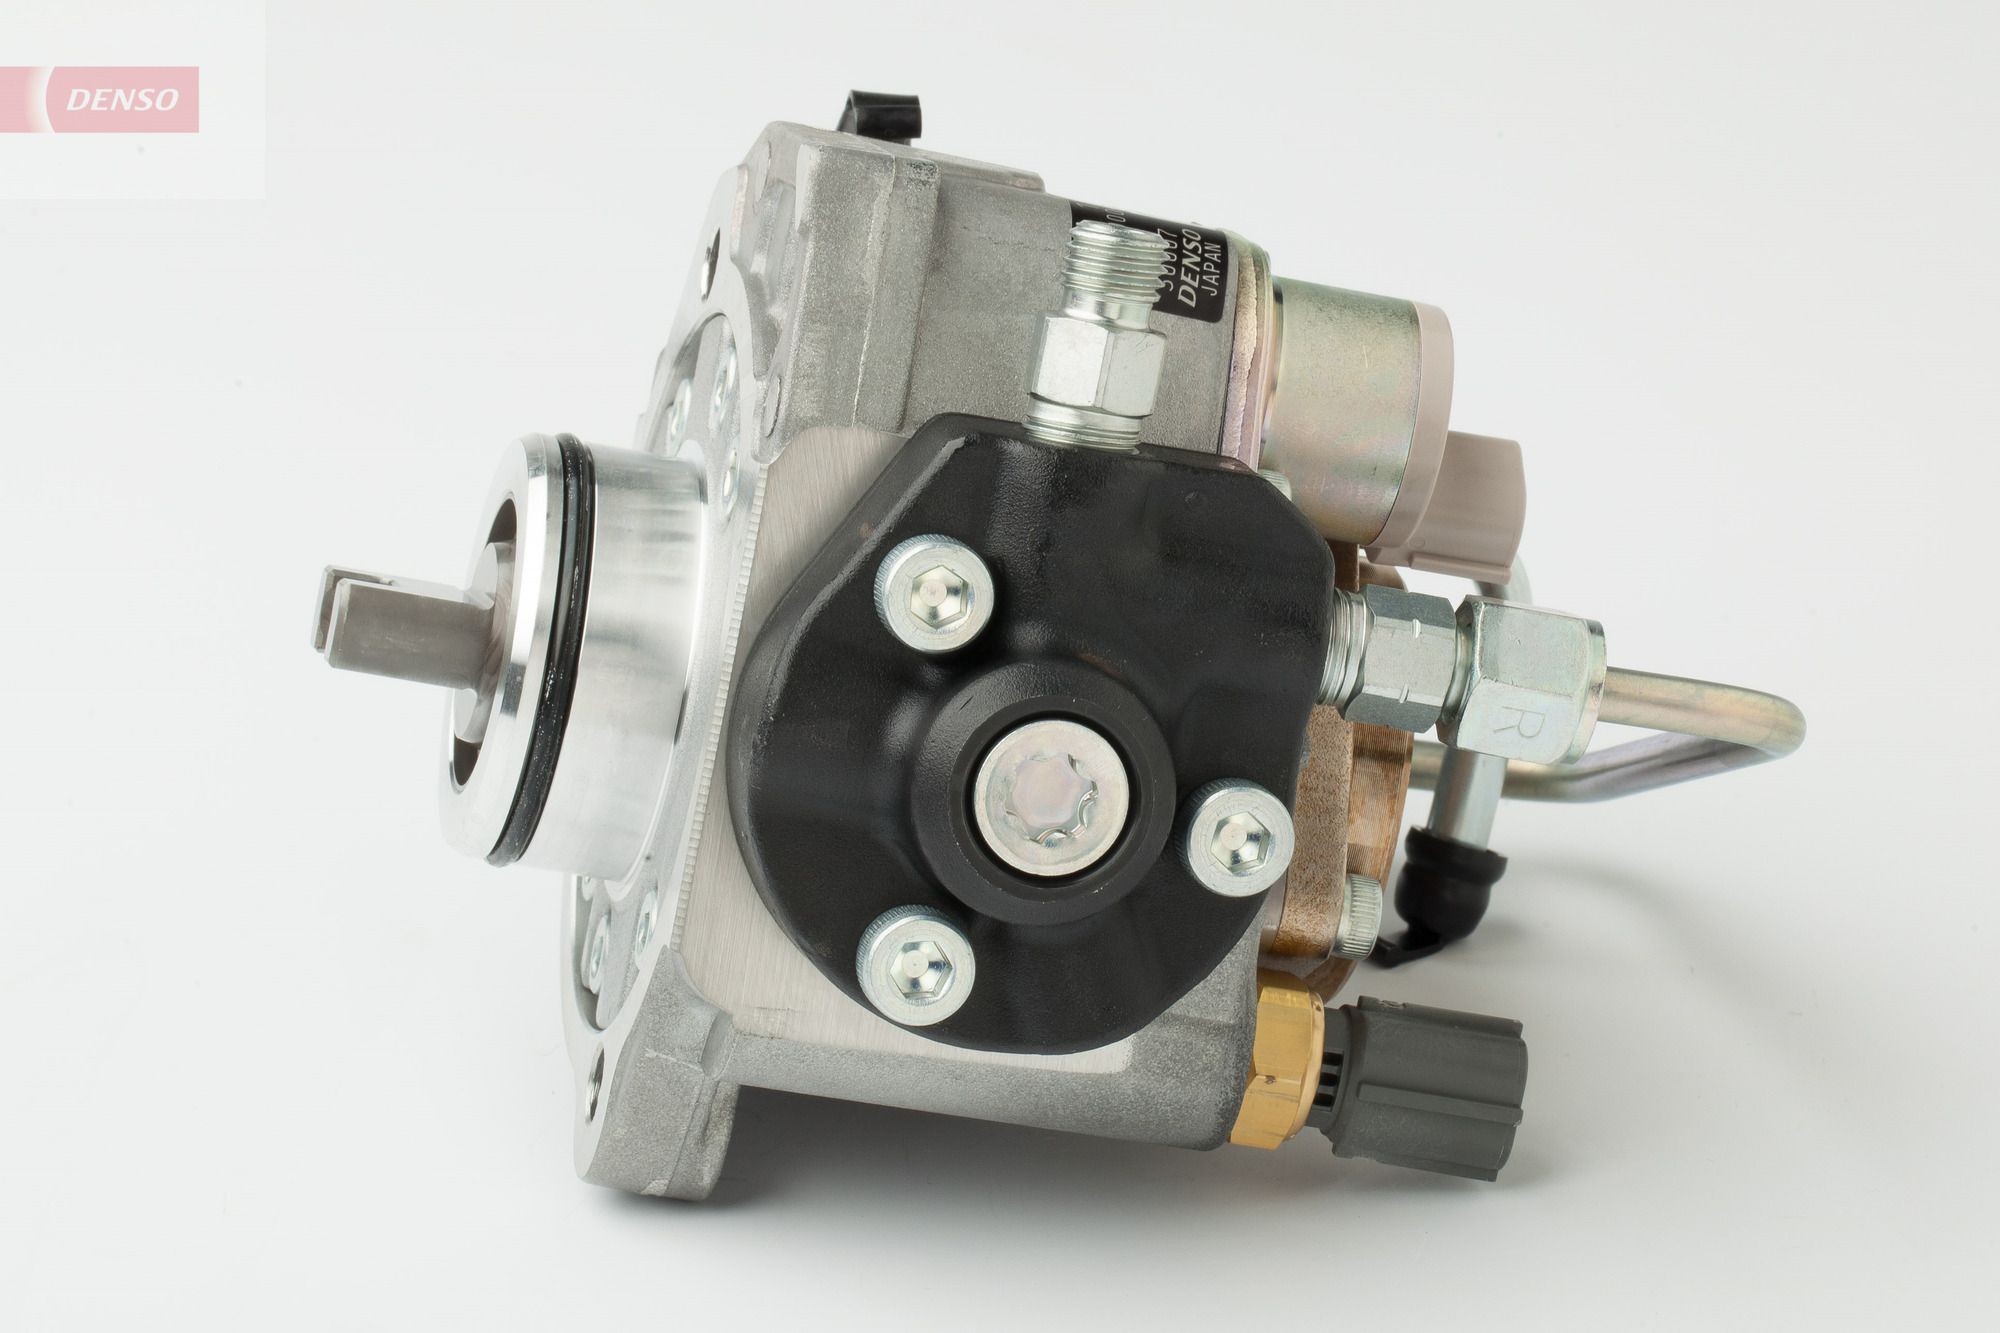 DCRP300620 DENSO Fuel injection pump NISSAN